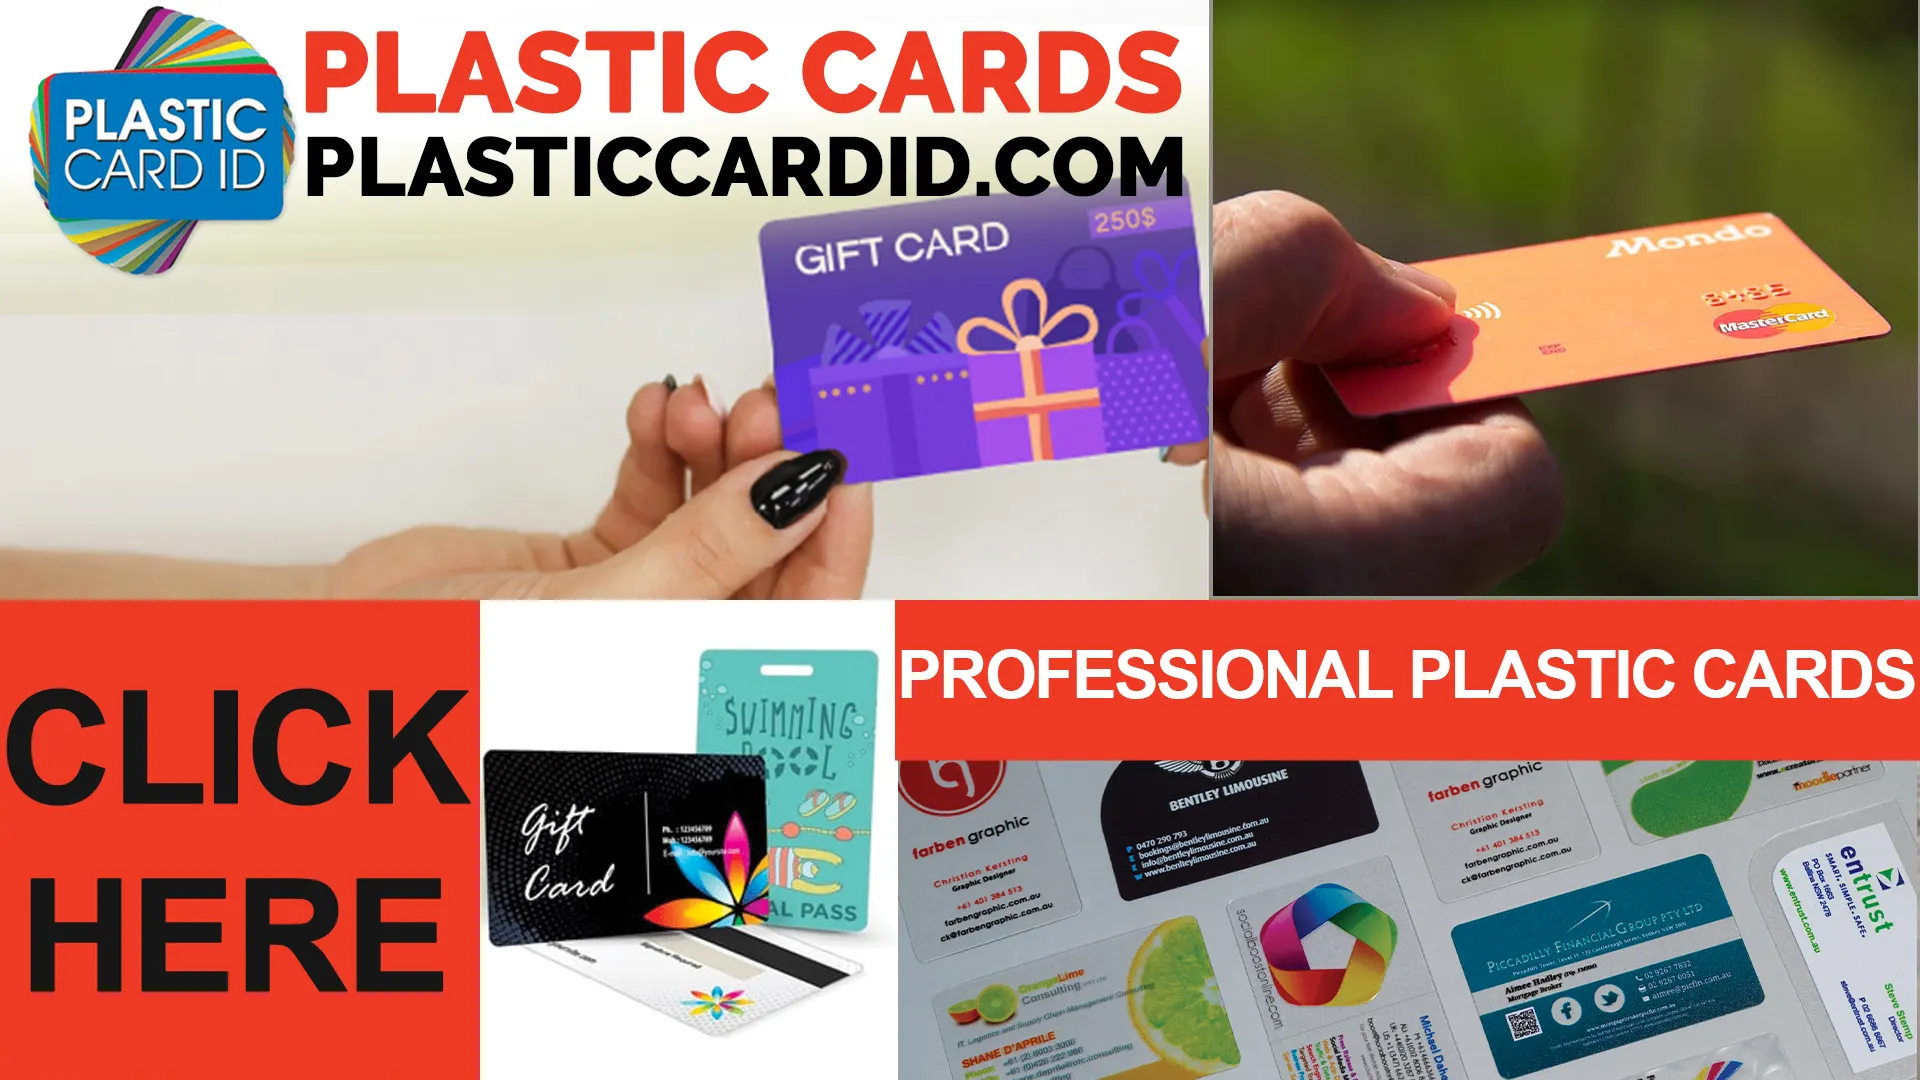 Welcome to the Next Generation of Card Security with Plastic Card ID




